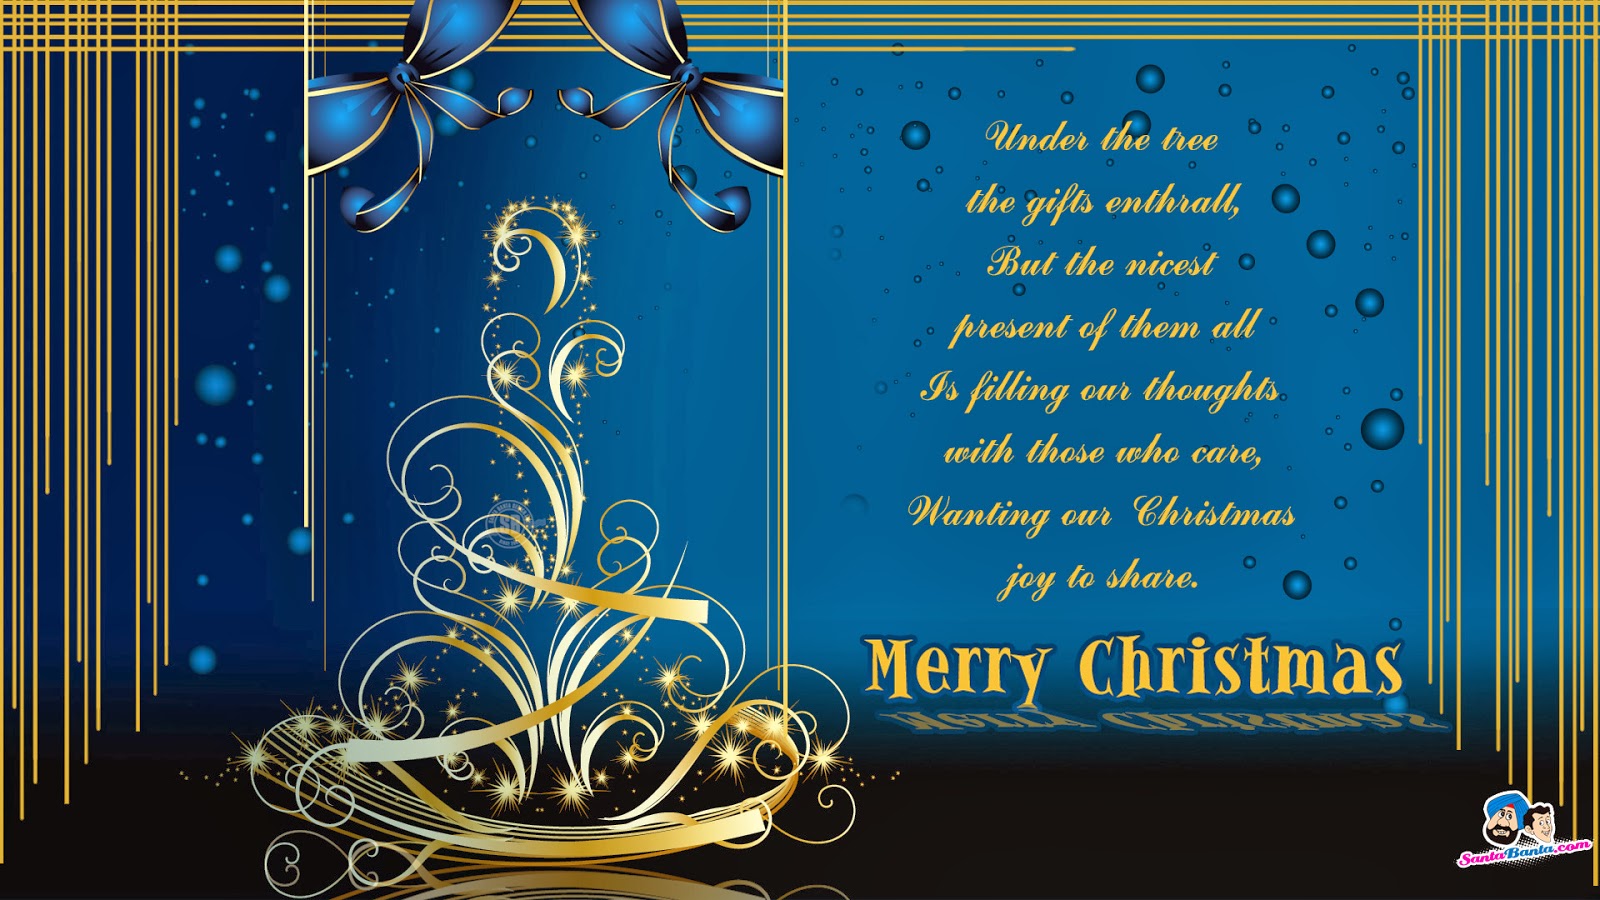 Christmas Clipart Christian Nature Pictures With Bible Verses Download